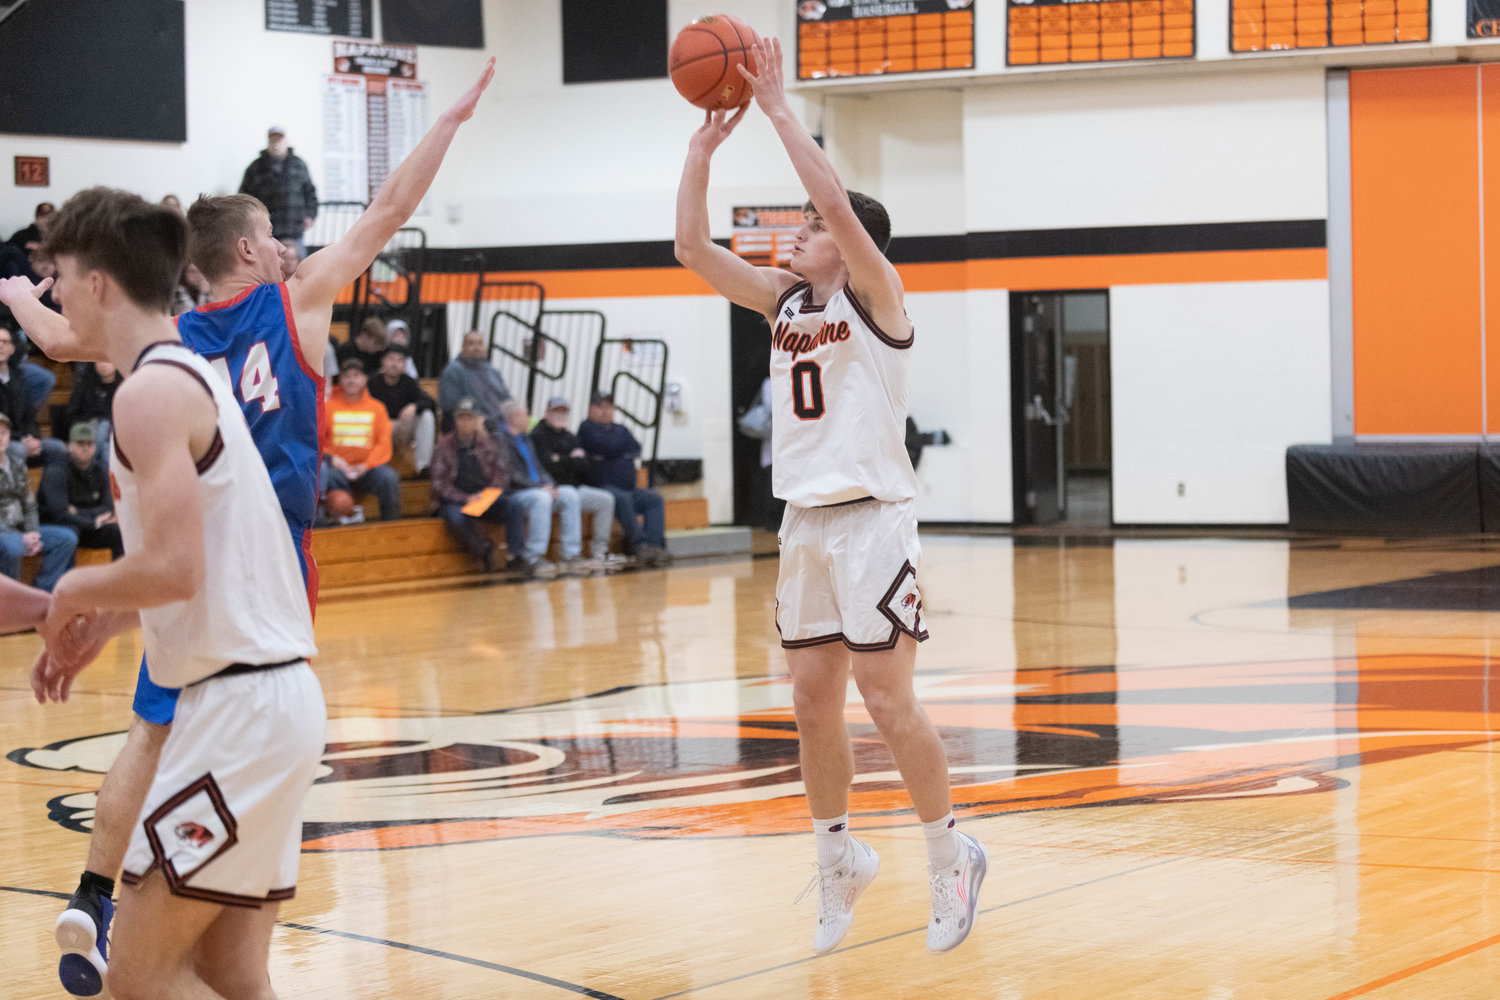 Cayle Kelly drills a 3-pointer during the first quarter of Napavine's 81-50 rout of Willapa Valley on Dec. 27.